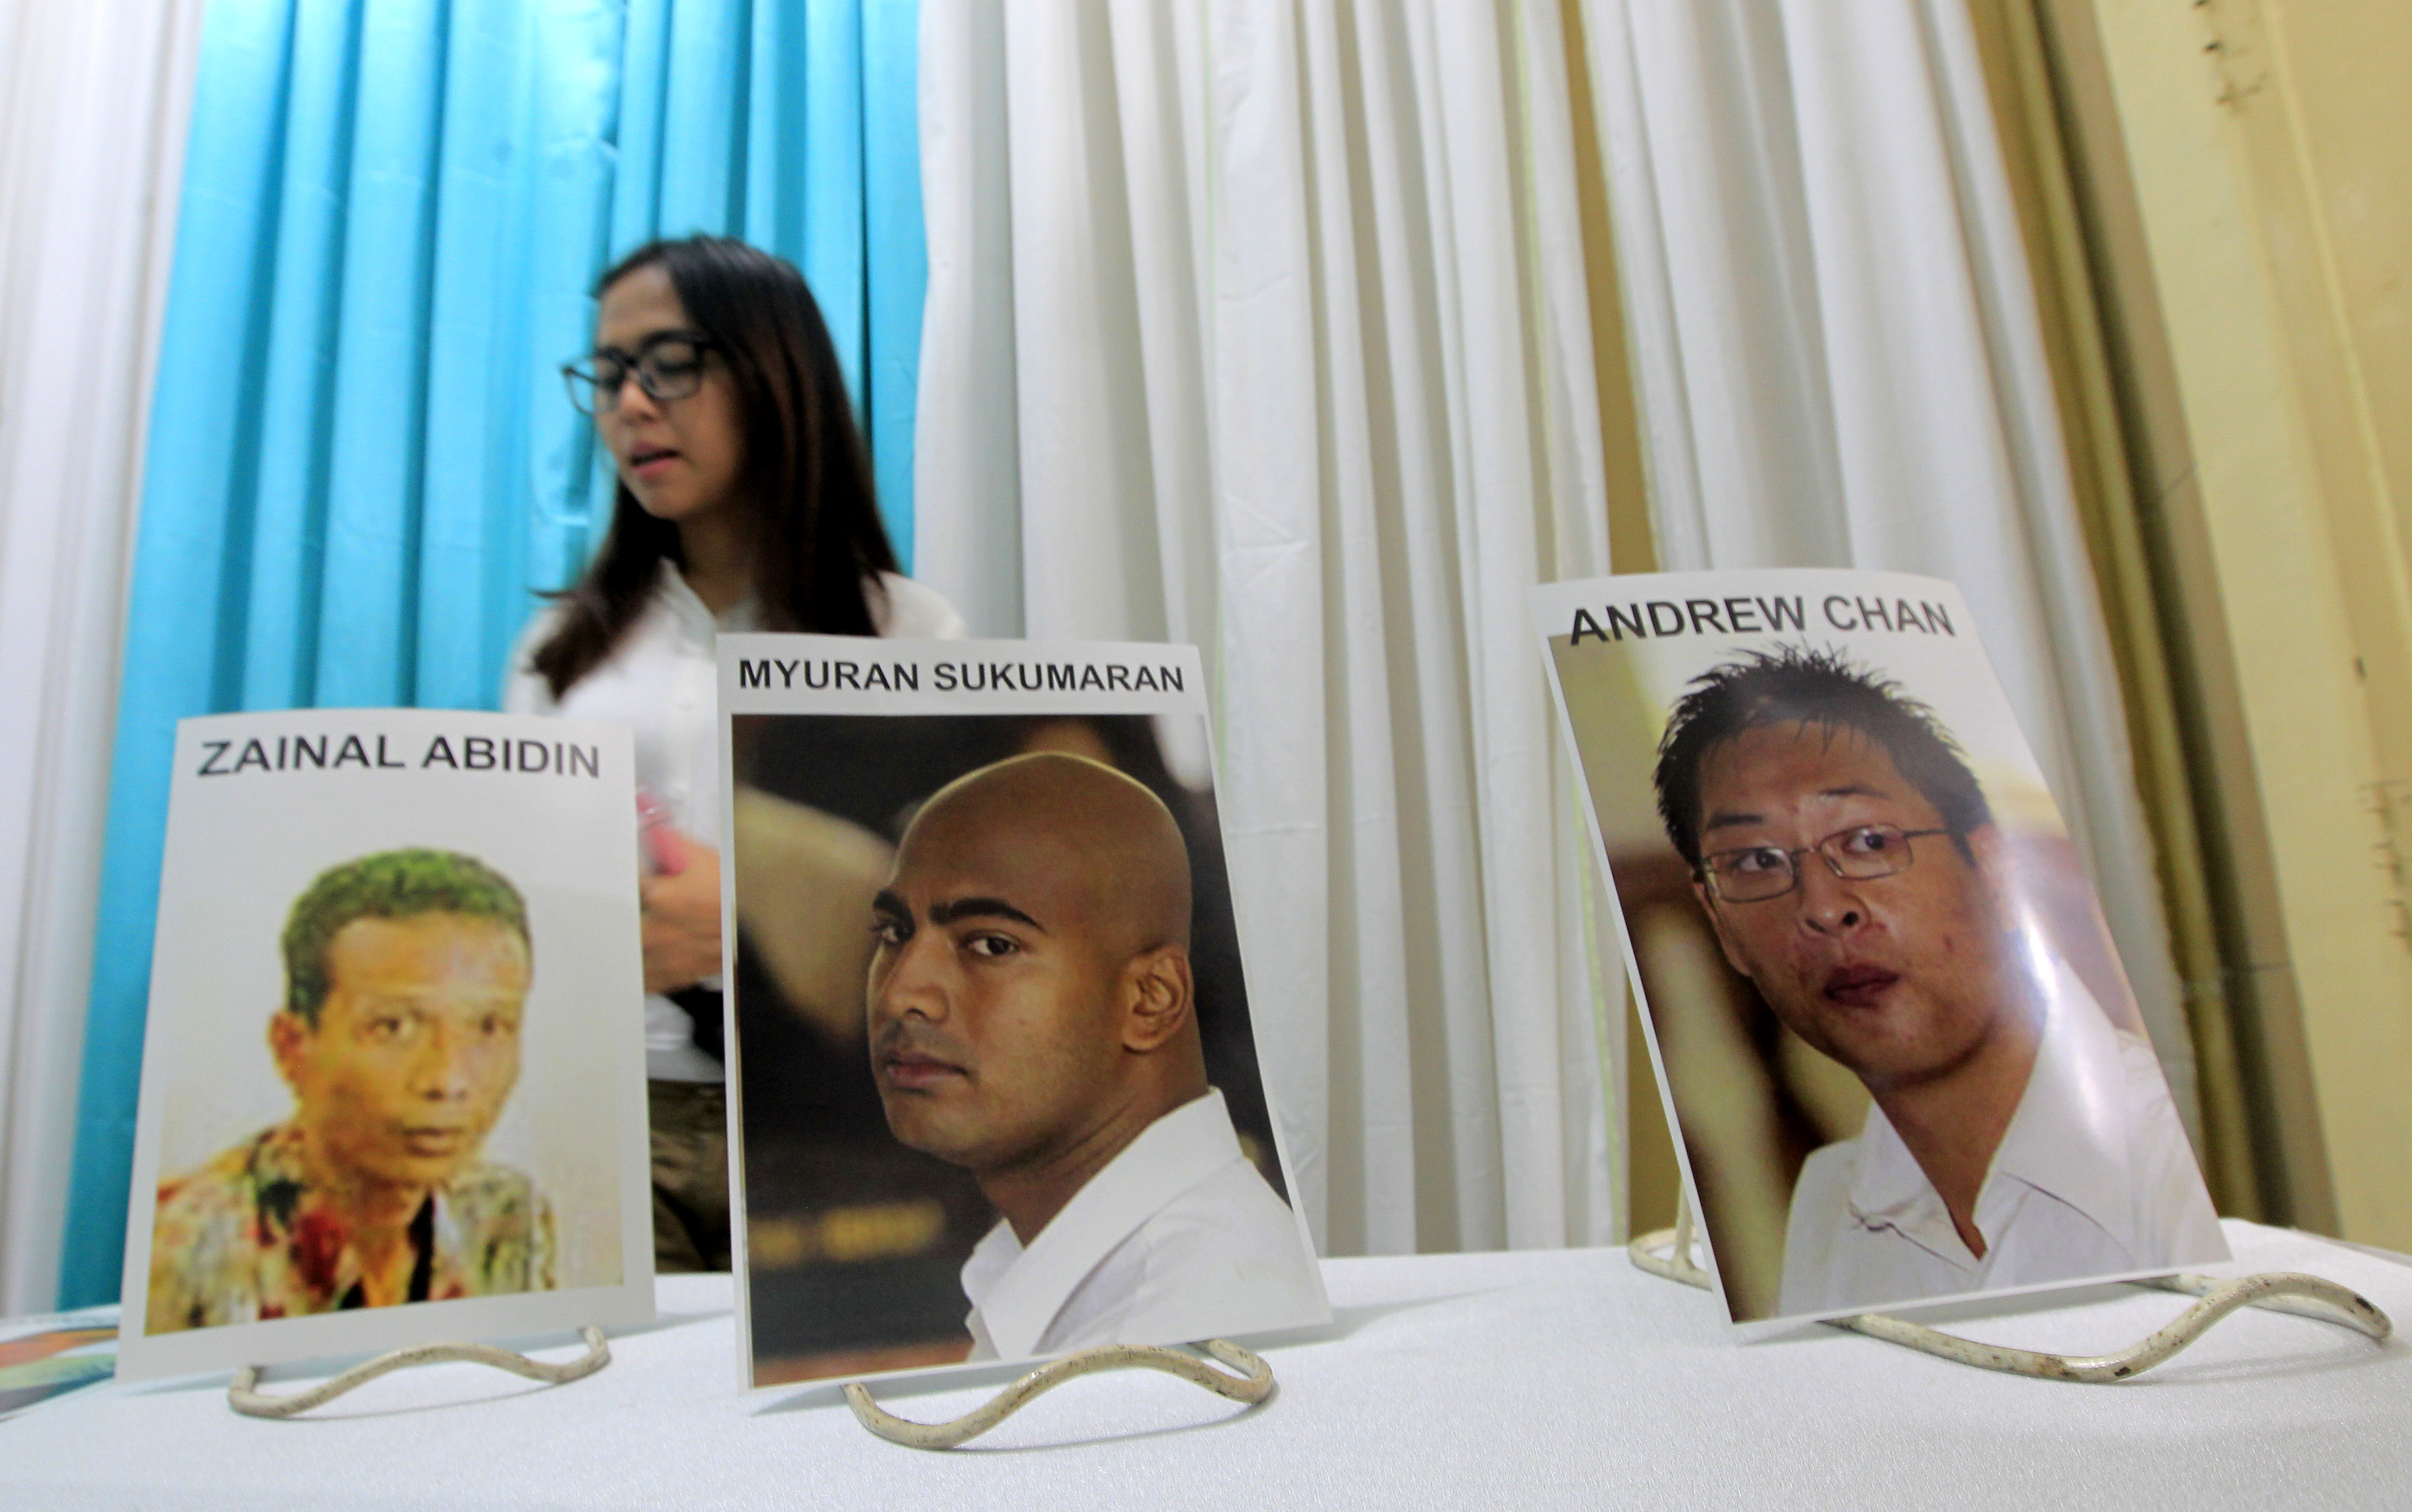 An Indonesian girl walks past pictures of executed Australian death-row prisoners Andrew Chan (R) and Myuran Sukumaran (C), and Indonesian Zainal Abidin, on display at Saint Carolus funeral home in Jakarta, Indonesia, 29 April 2015. Photo by Bagus Indahono/EPA 